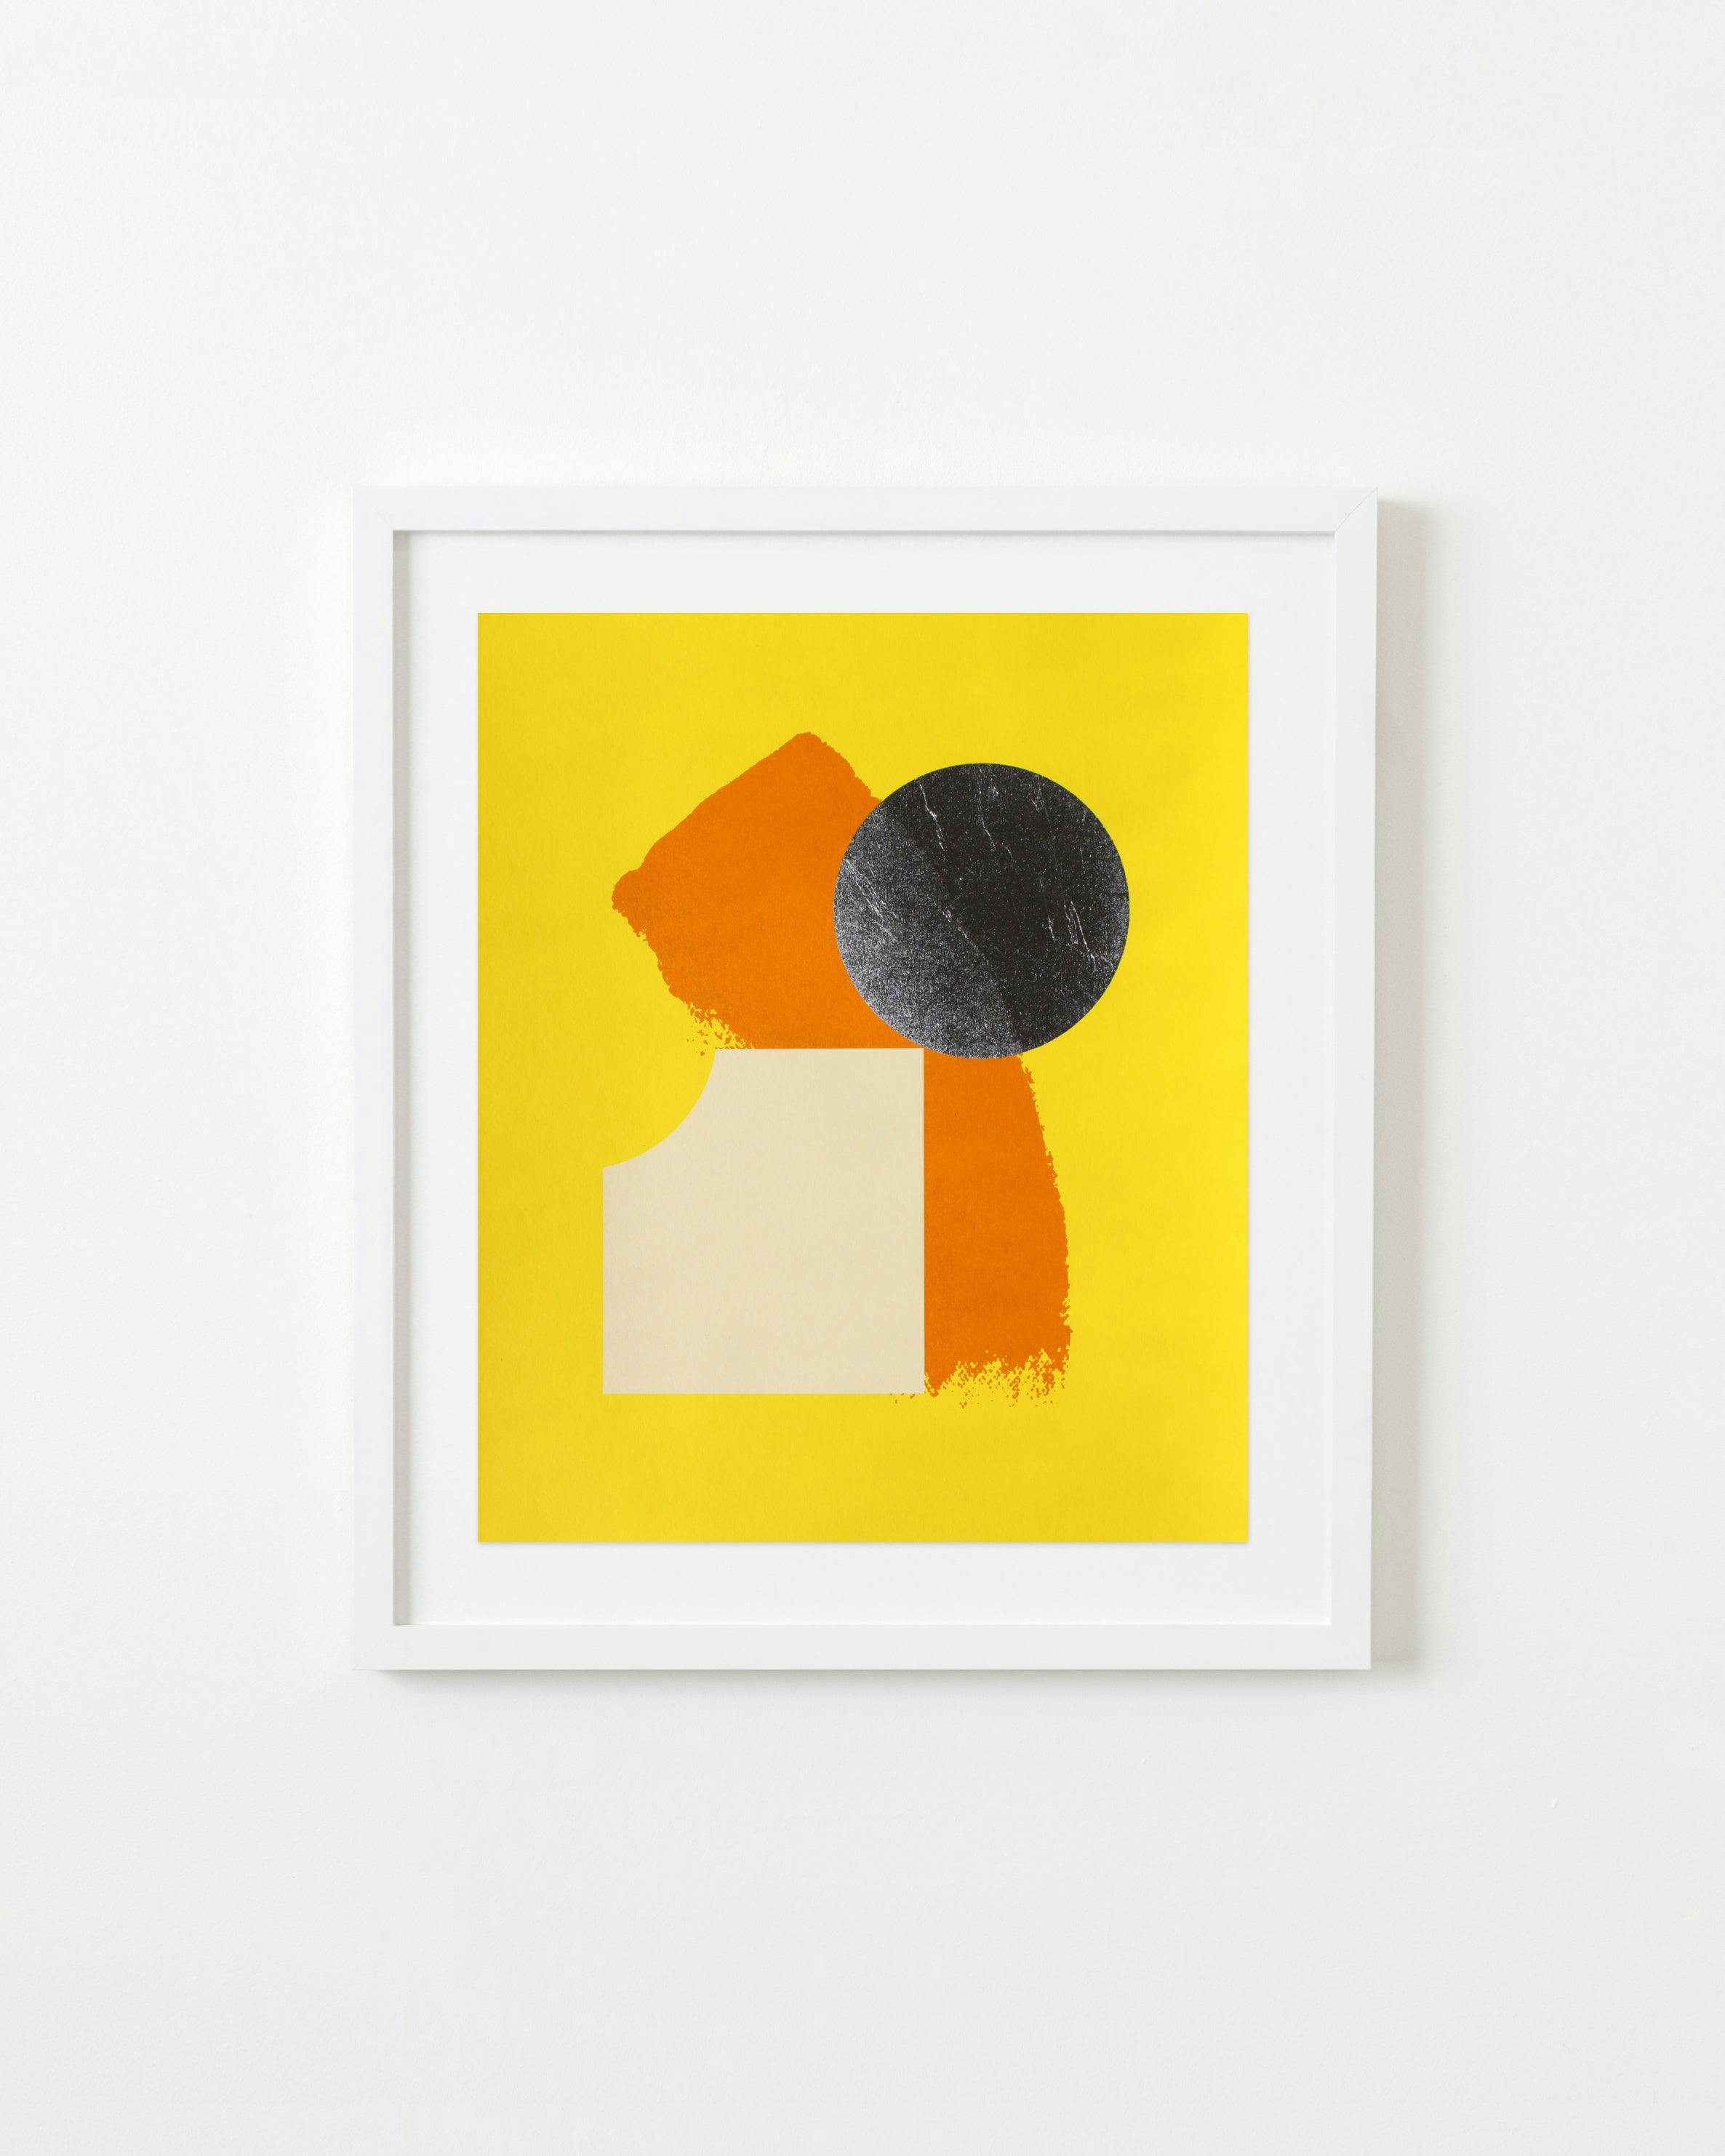 Print by Chad Kouri titled "Opportunity for Reflection (Yellow)".